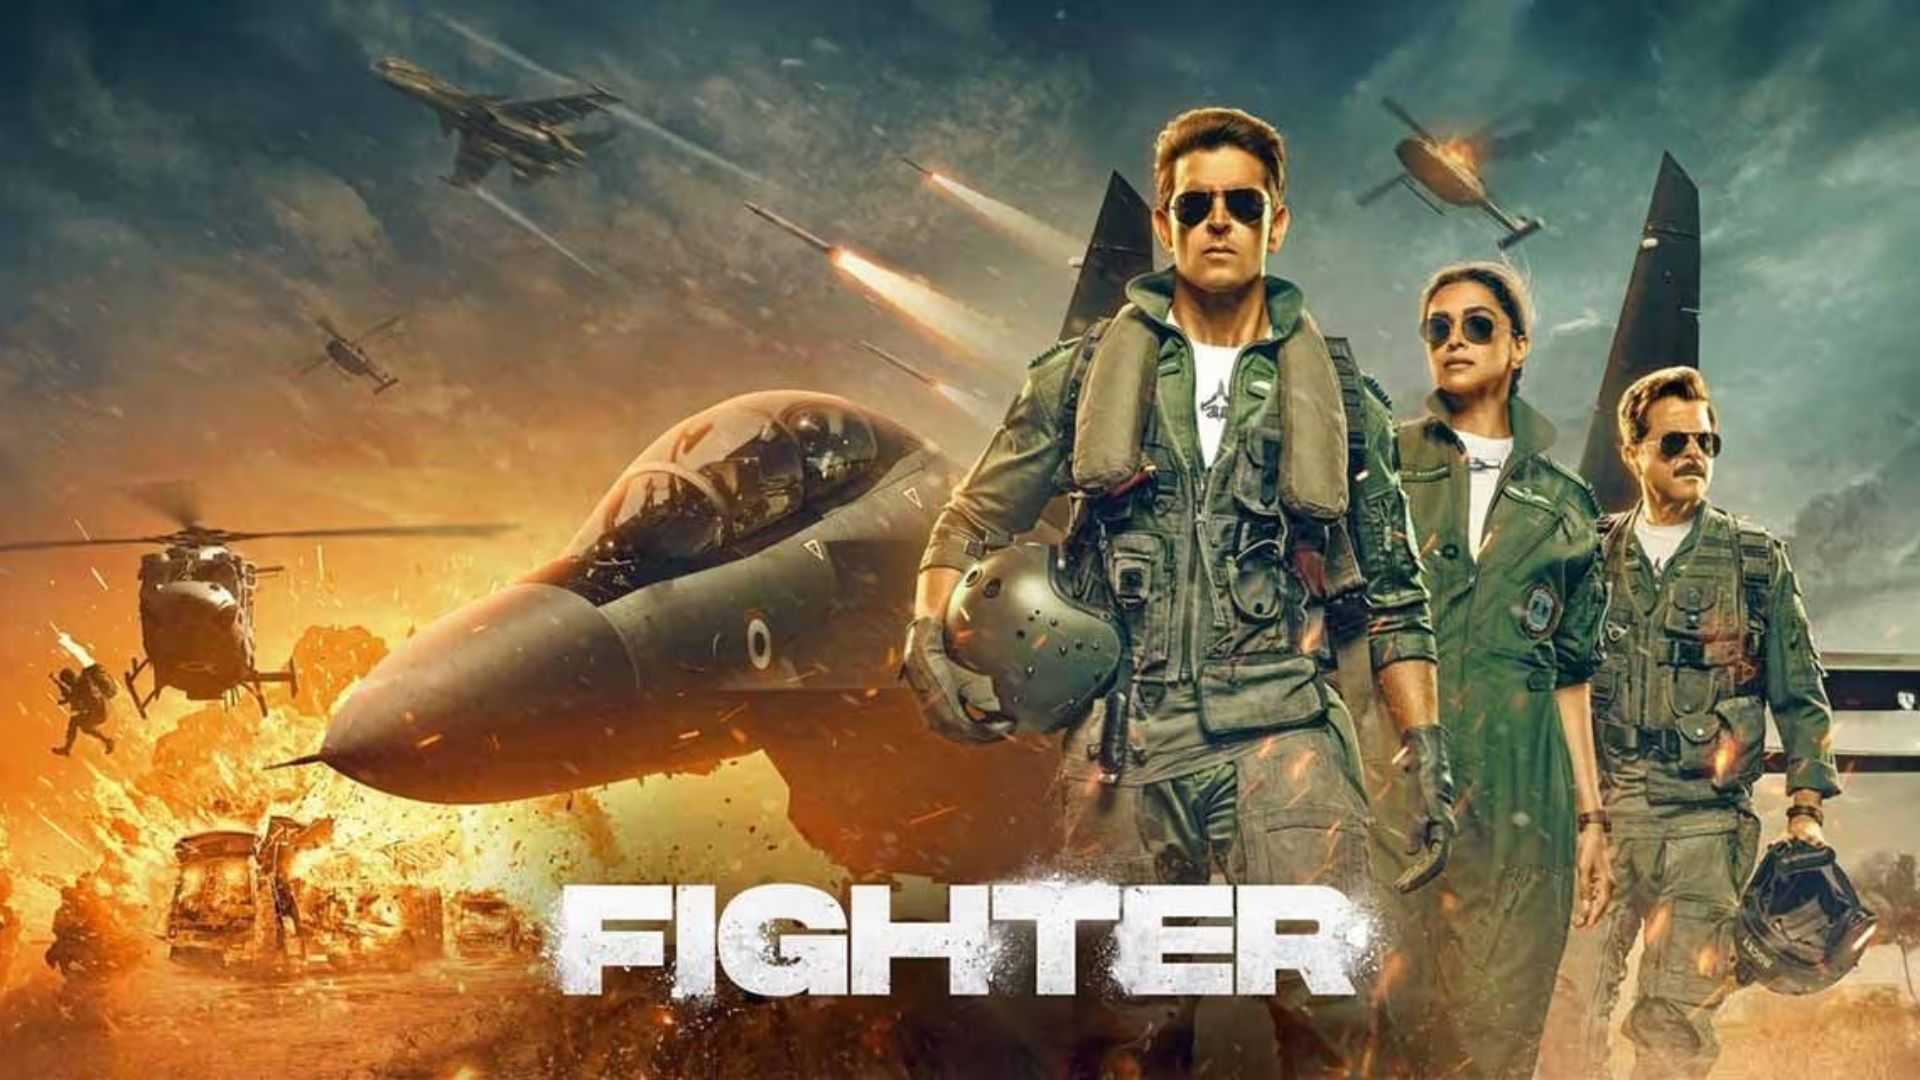 Fighter Box Office Day 2: Hrithik Roshan-Deepika Padukone starrer inches closer to the Rs 100 crore-mark worldwide